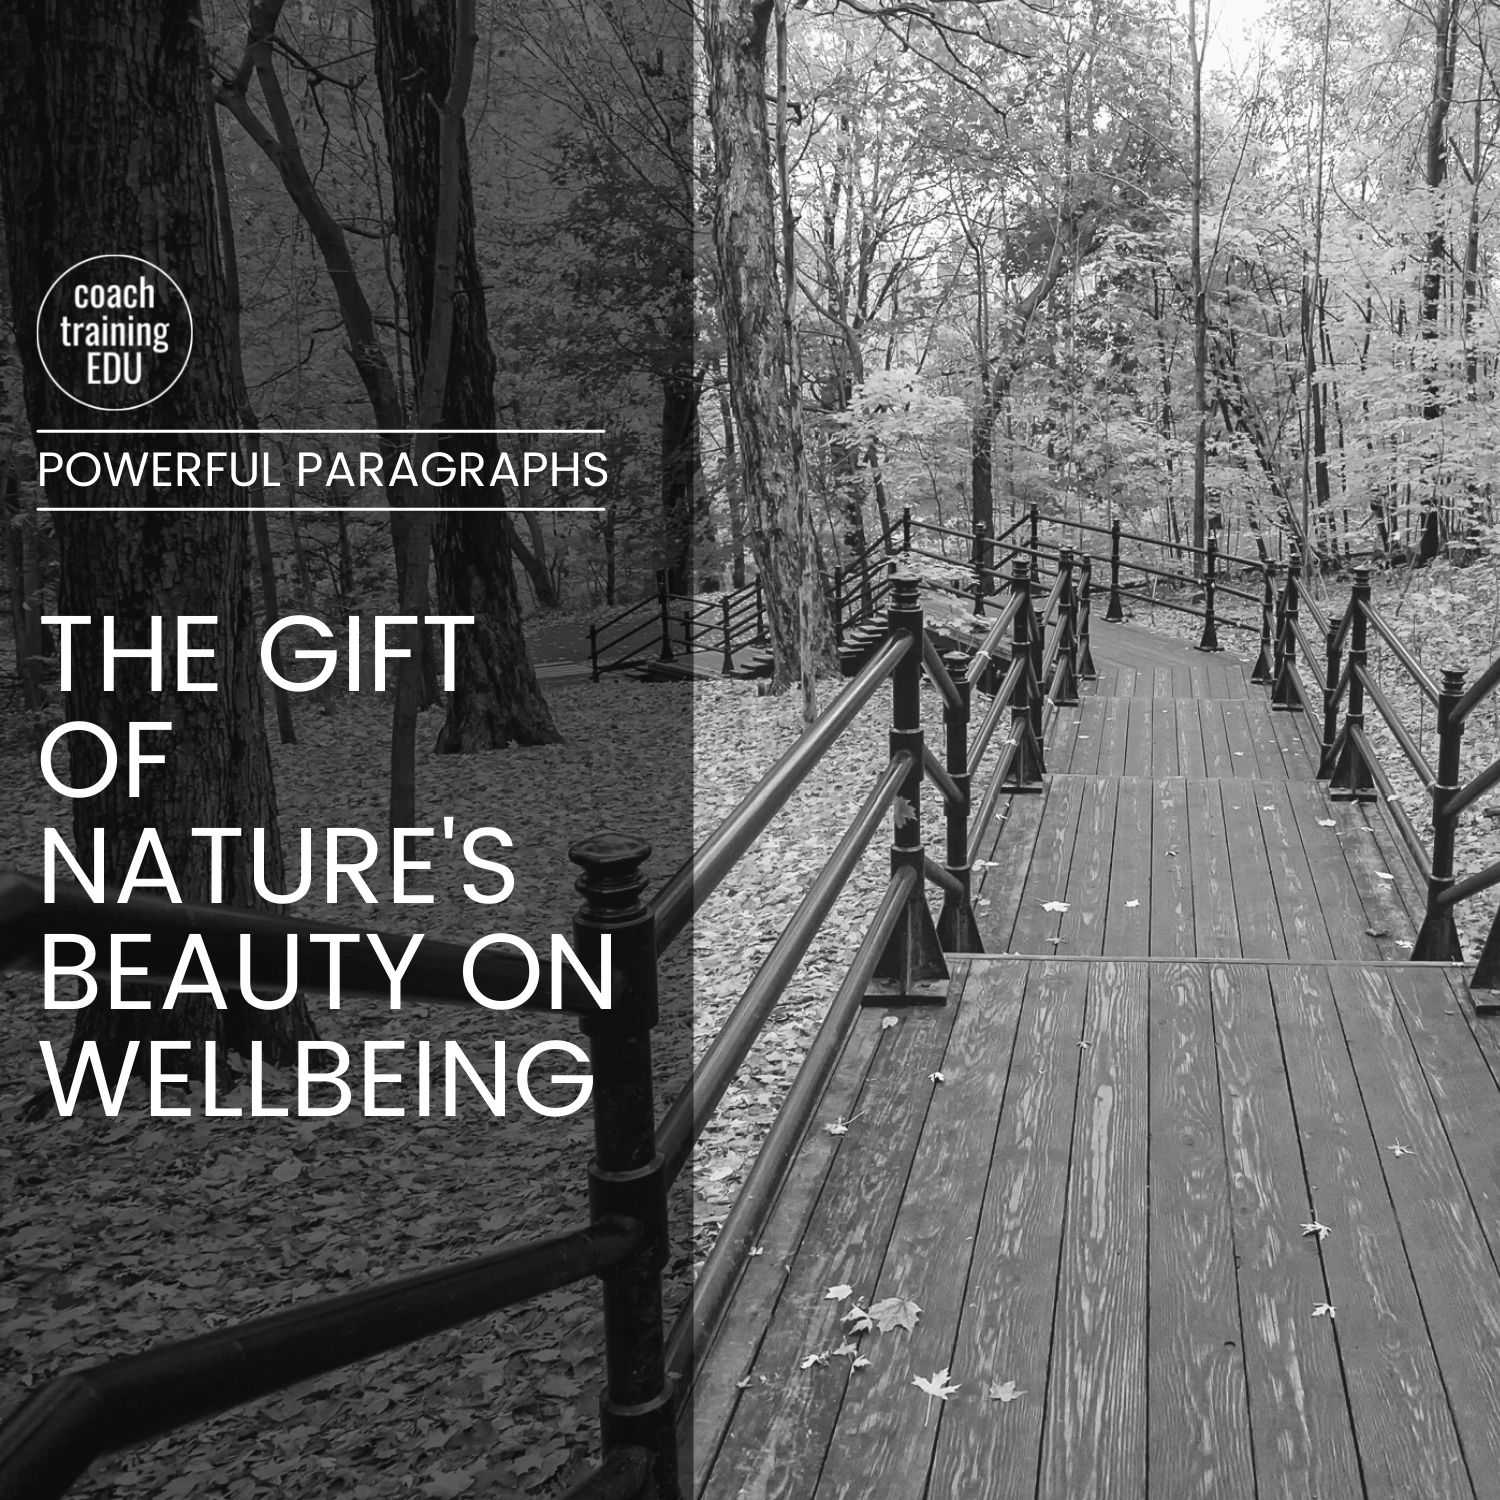 The Gift of Nature's Beauty on Wellbeing